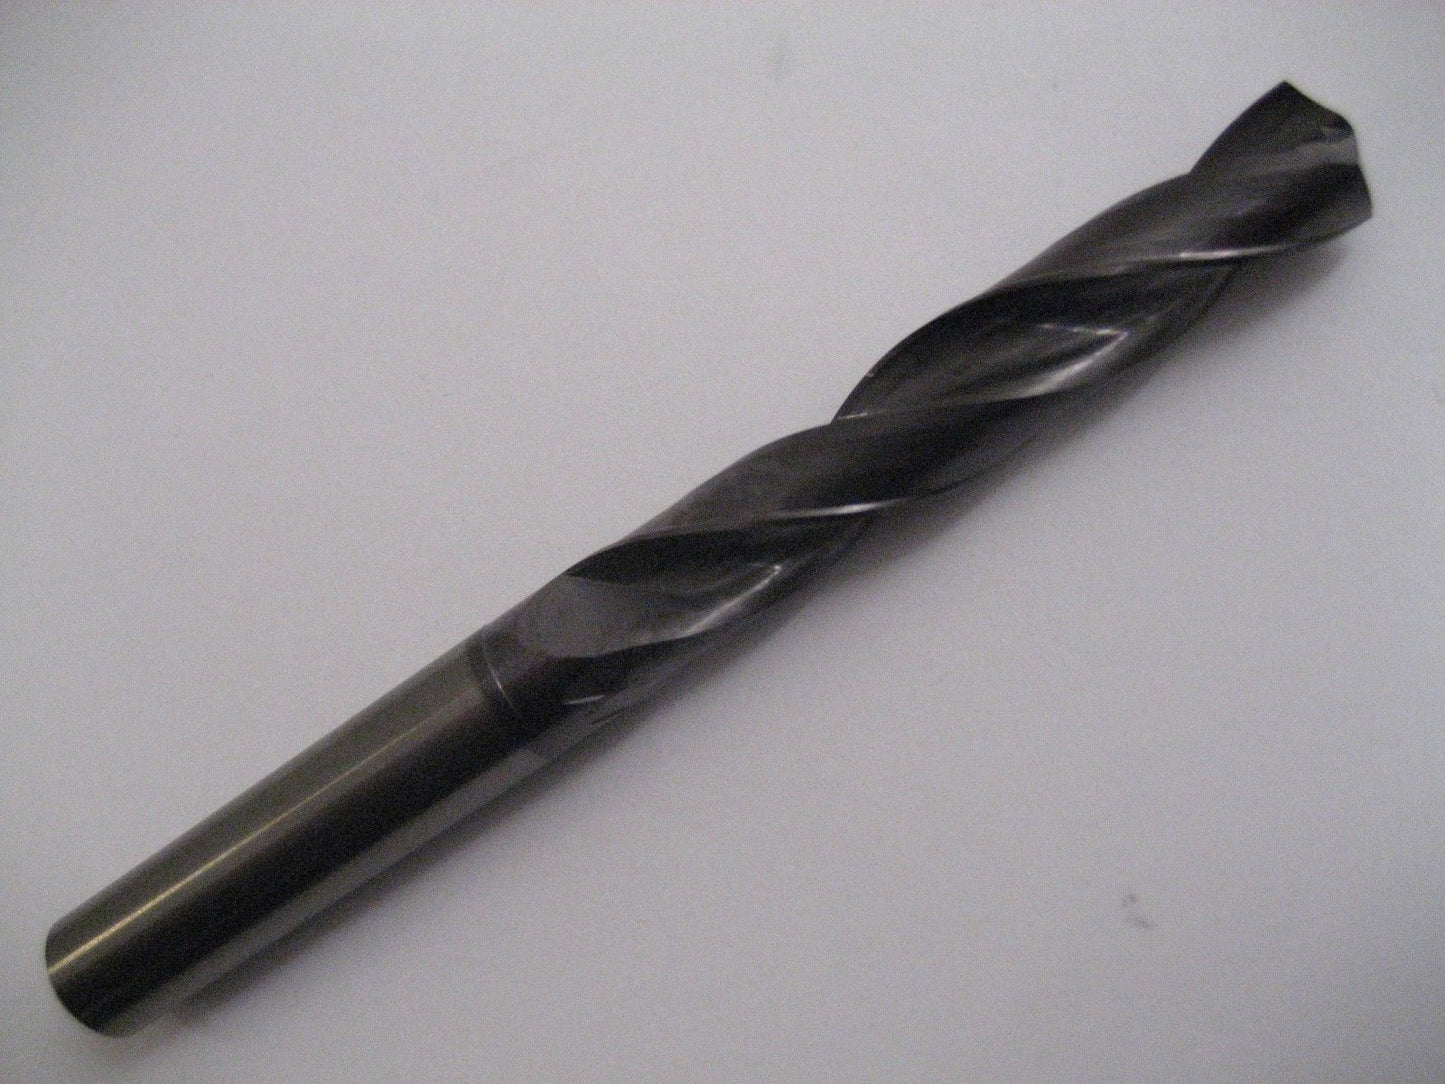 2.8mm CARBIDE 5 x D 2 Fluted TiALN Coated Gold Drill